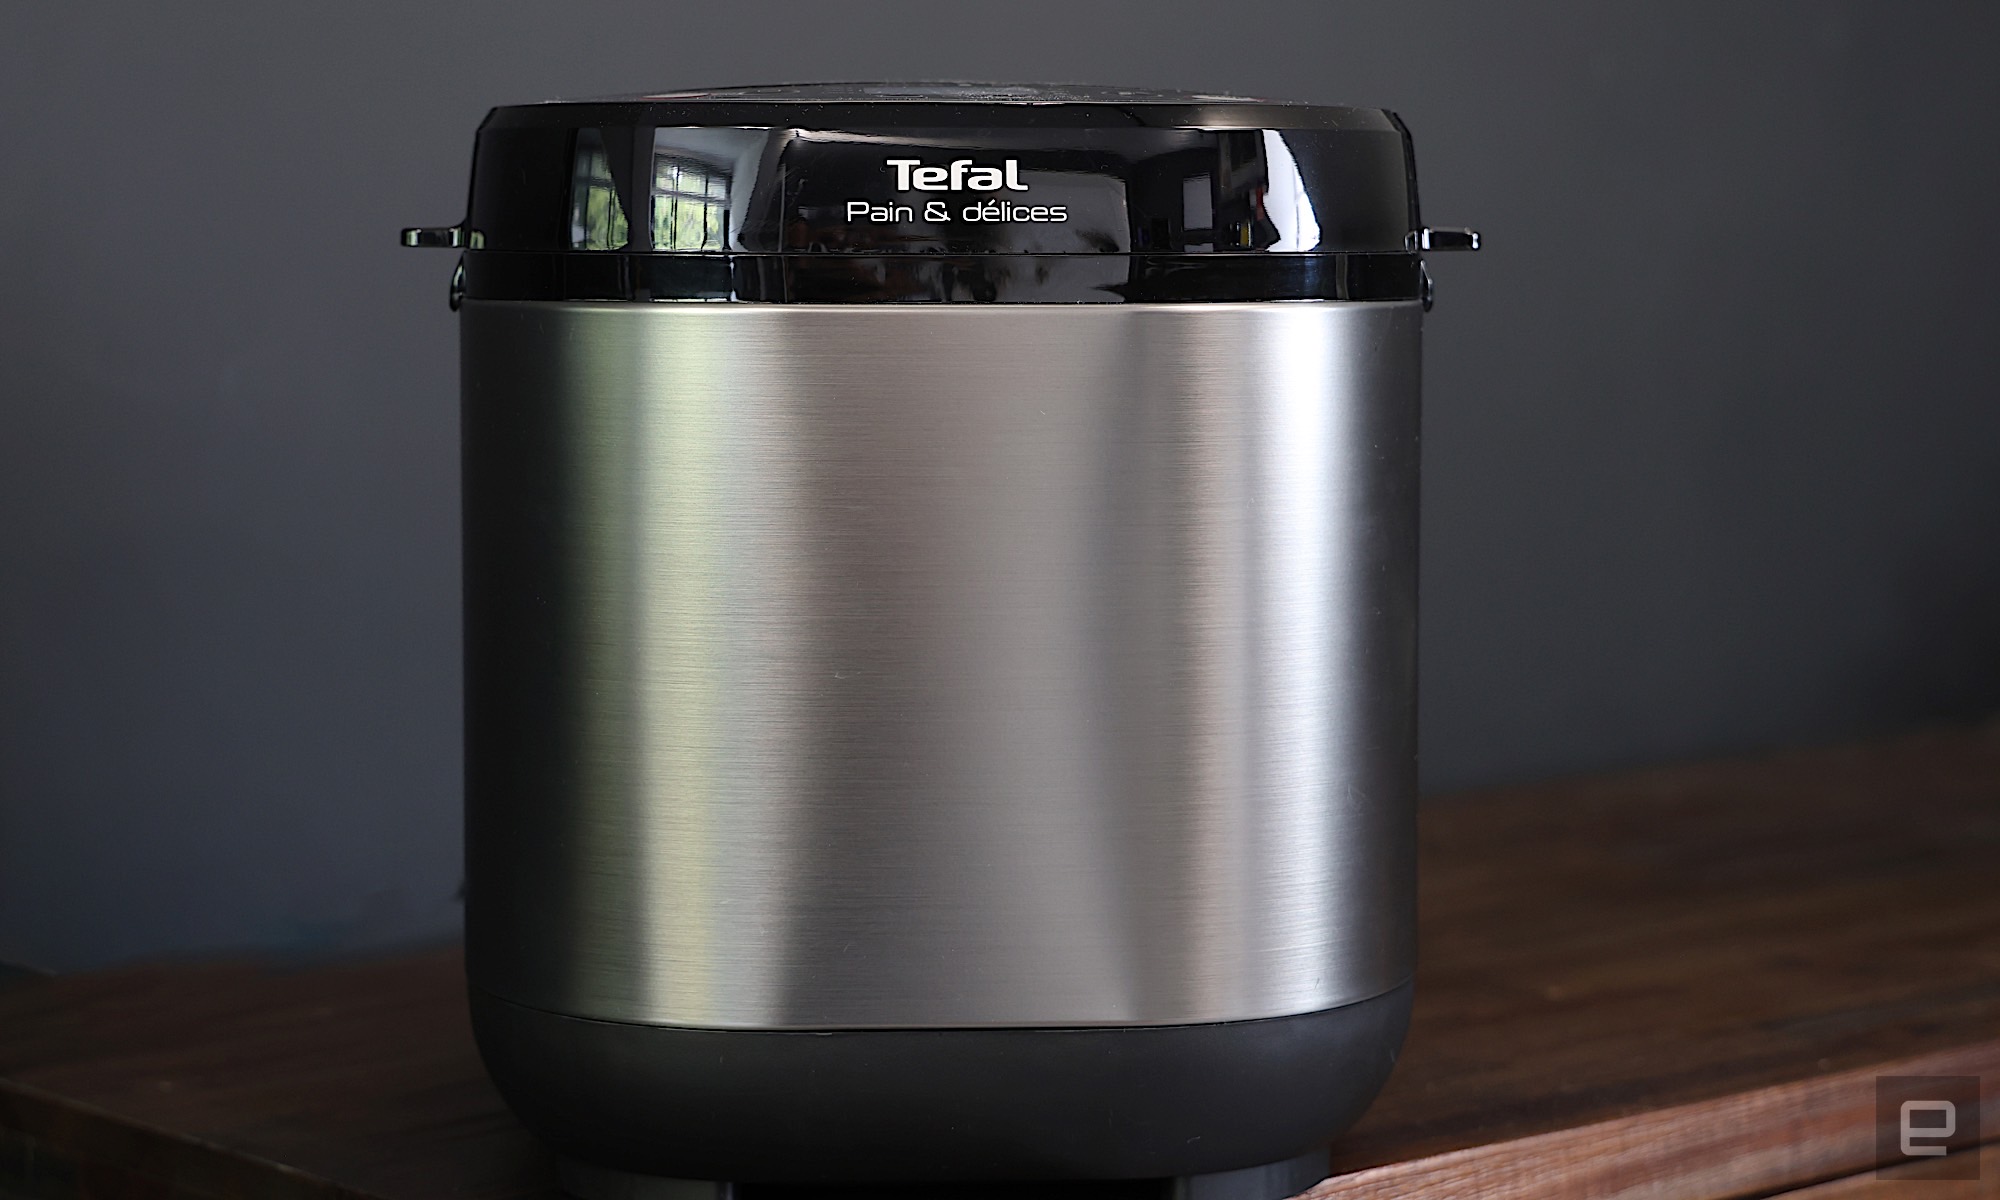 Image of a Tefal bread maker on a tabletop.